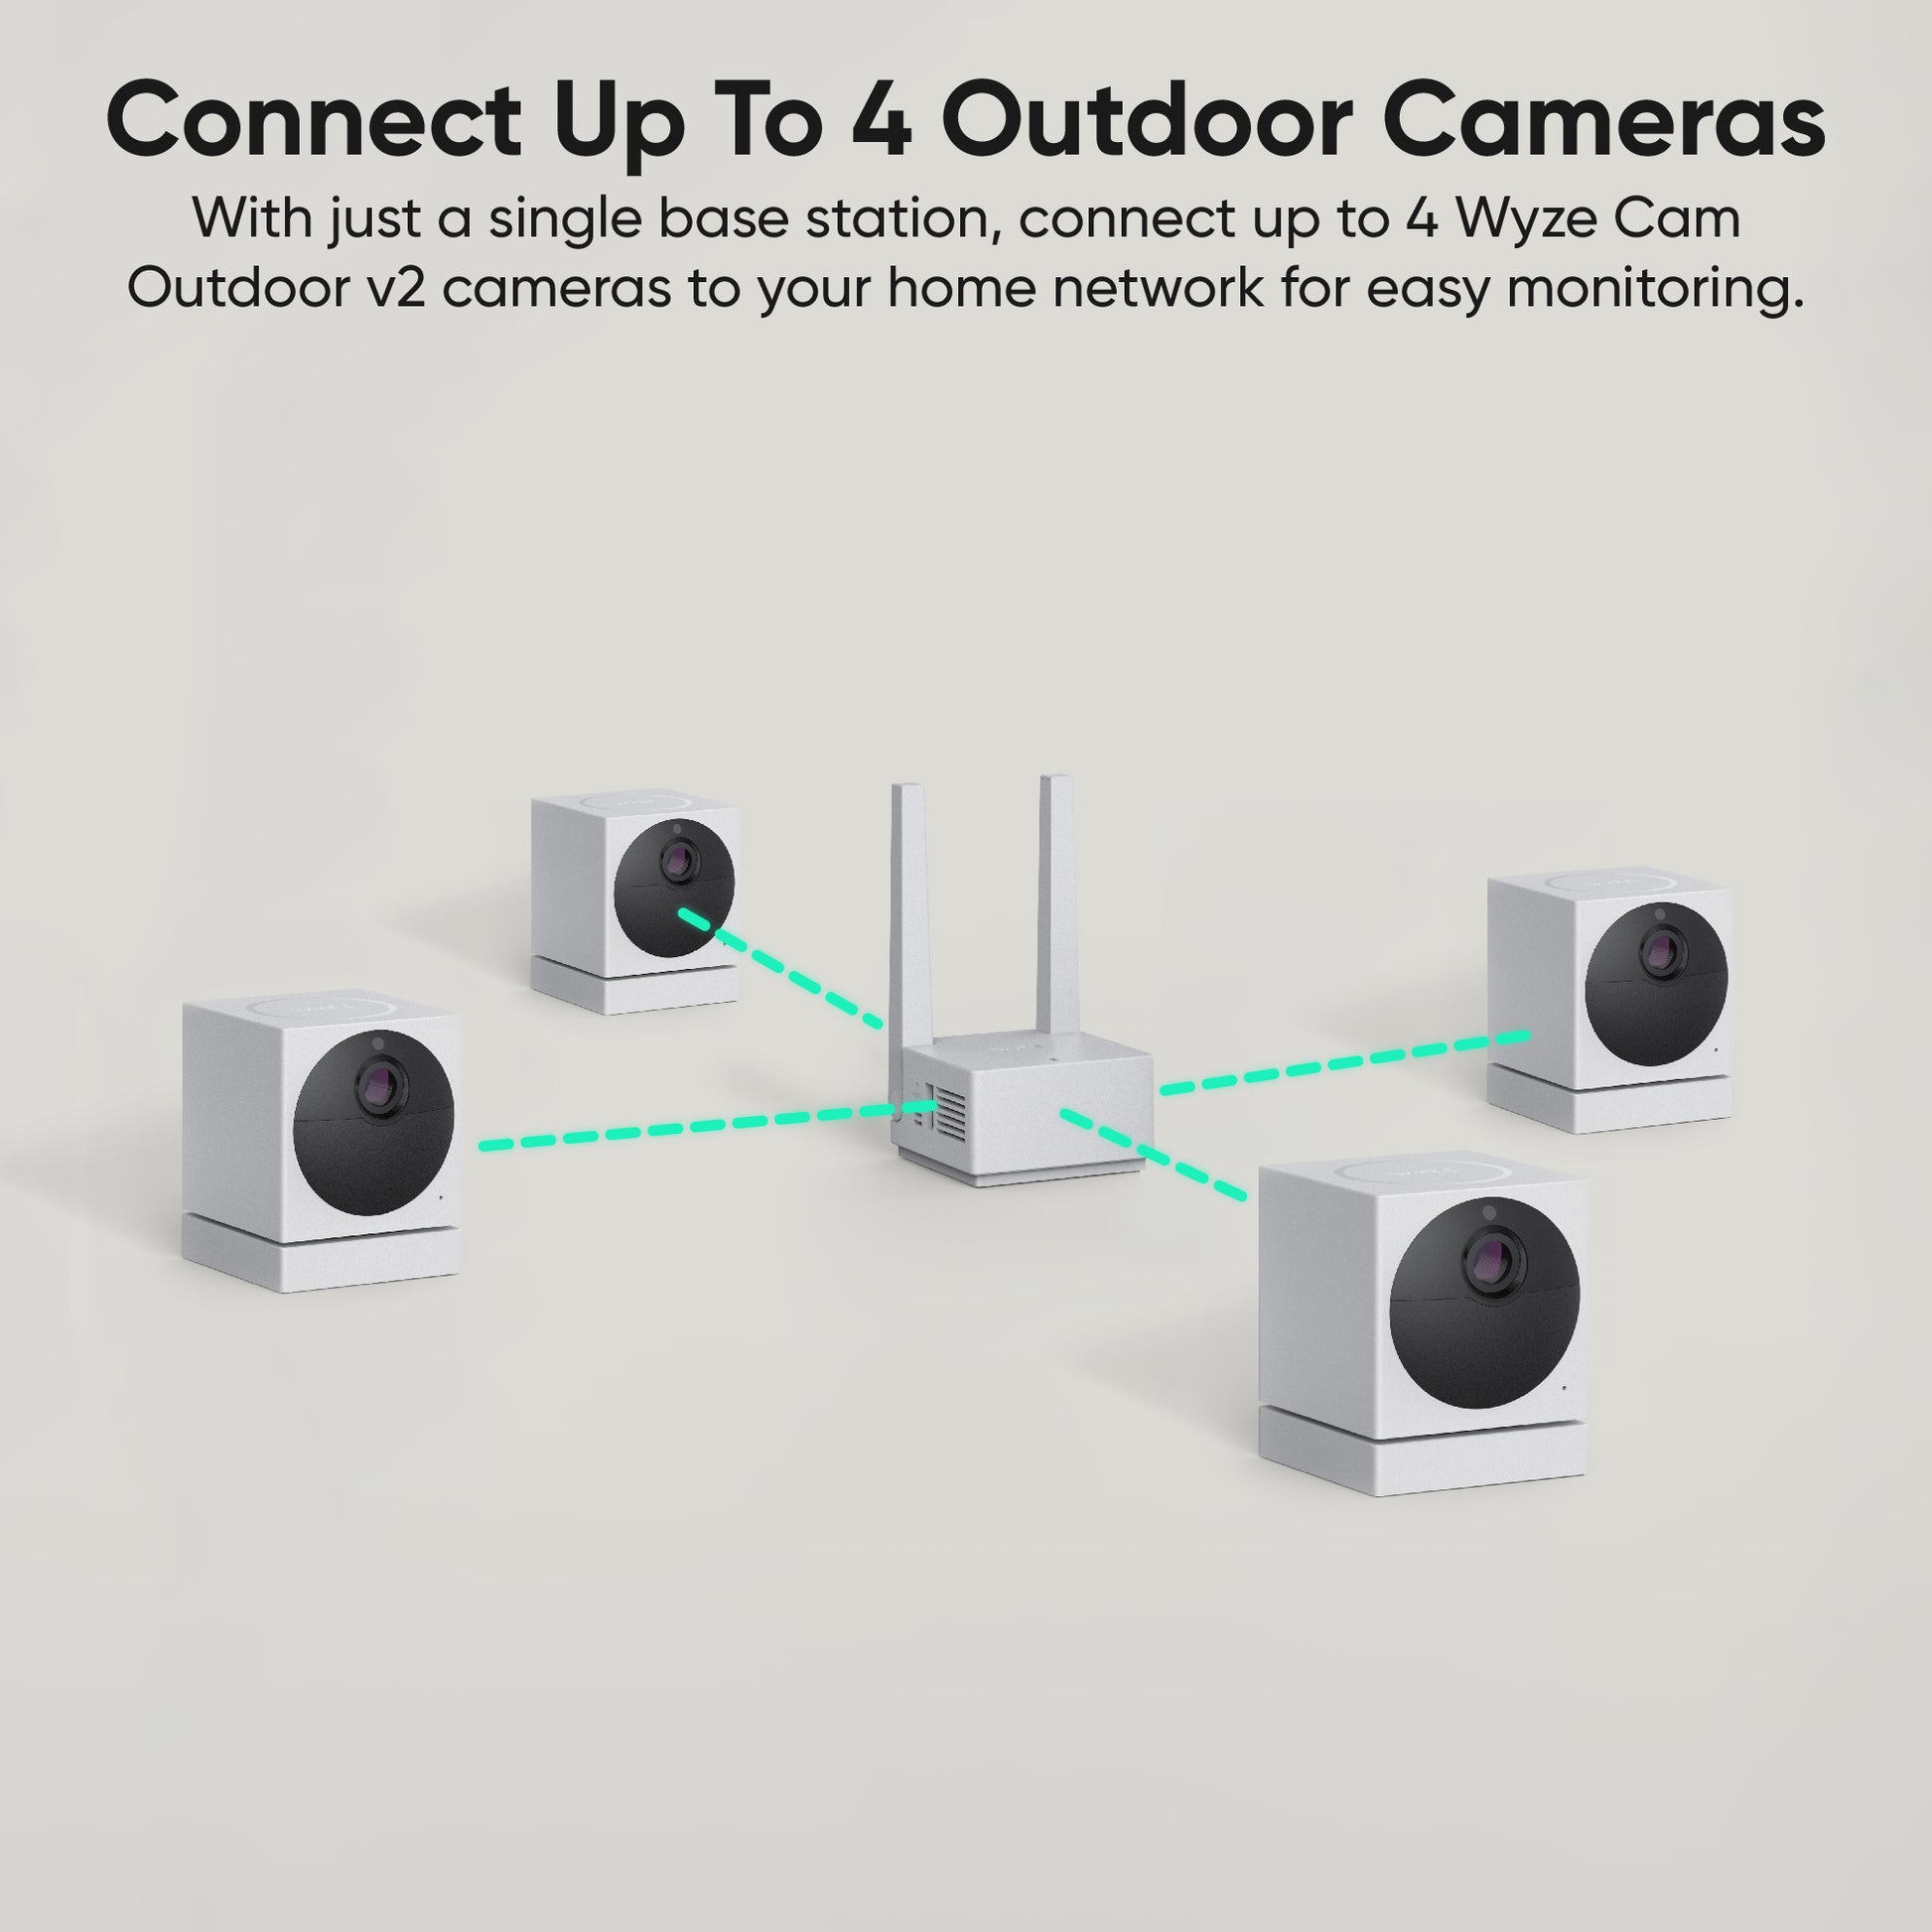 How to Reconnect My Wyze Camera